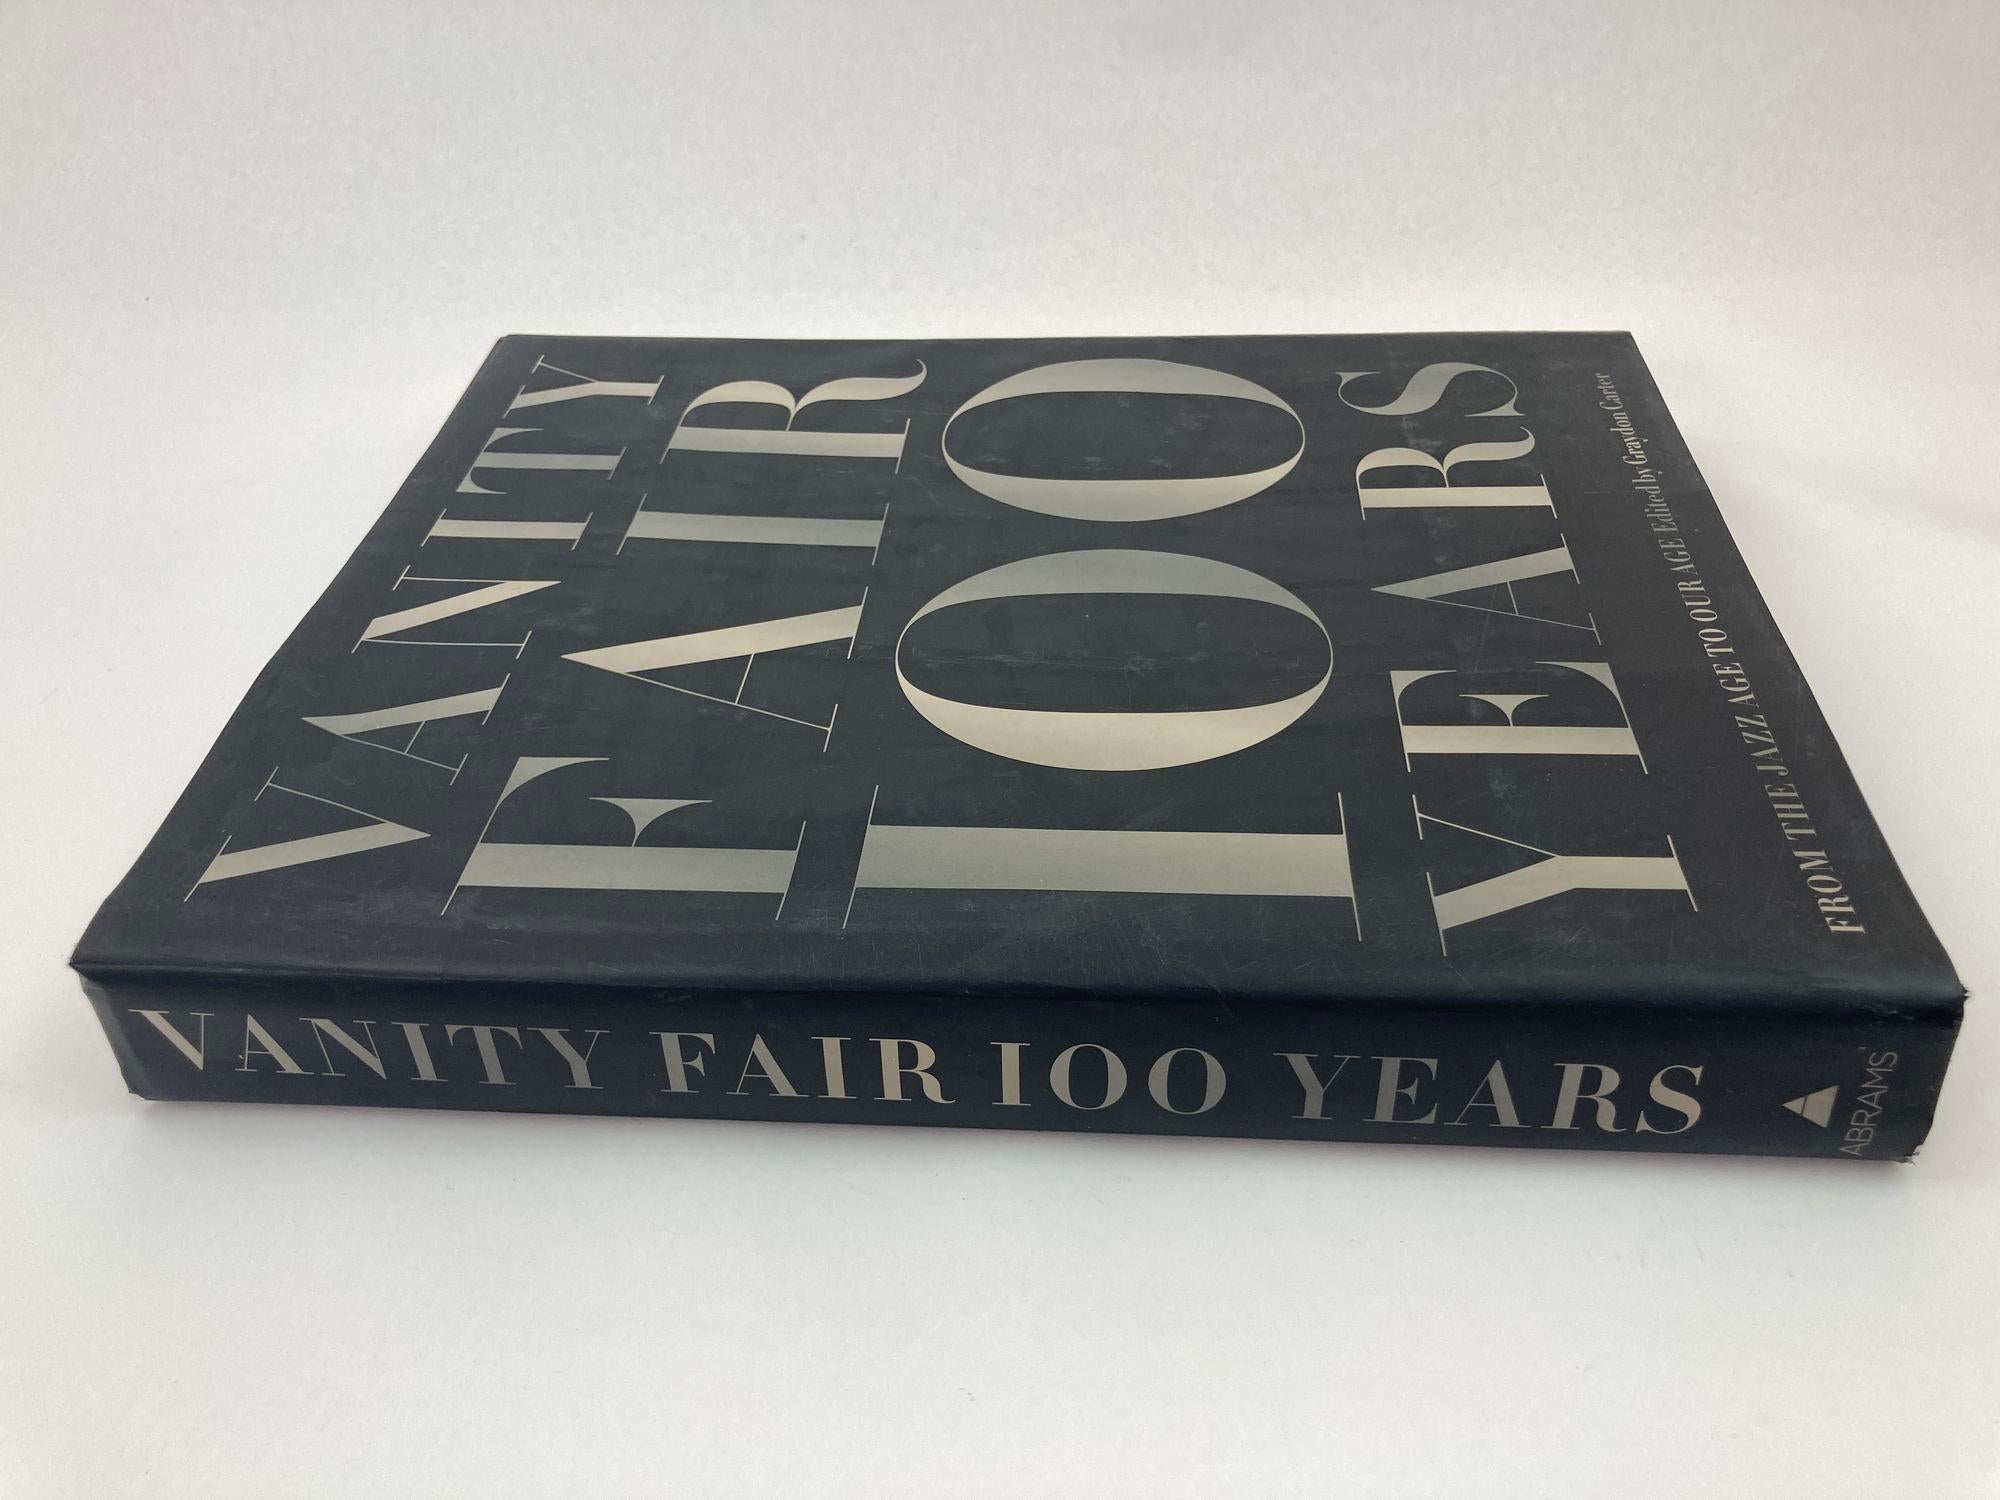 American Vanity Fair 100 Years From the Jazz Age to Our Age 2013 Large Hardcover Book For Sale